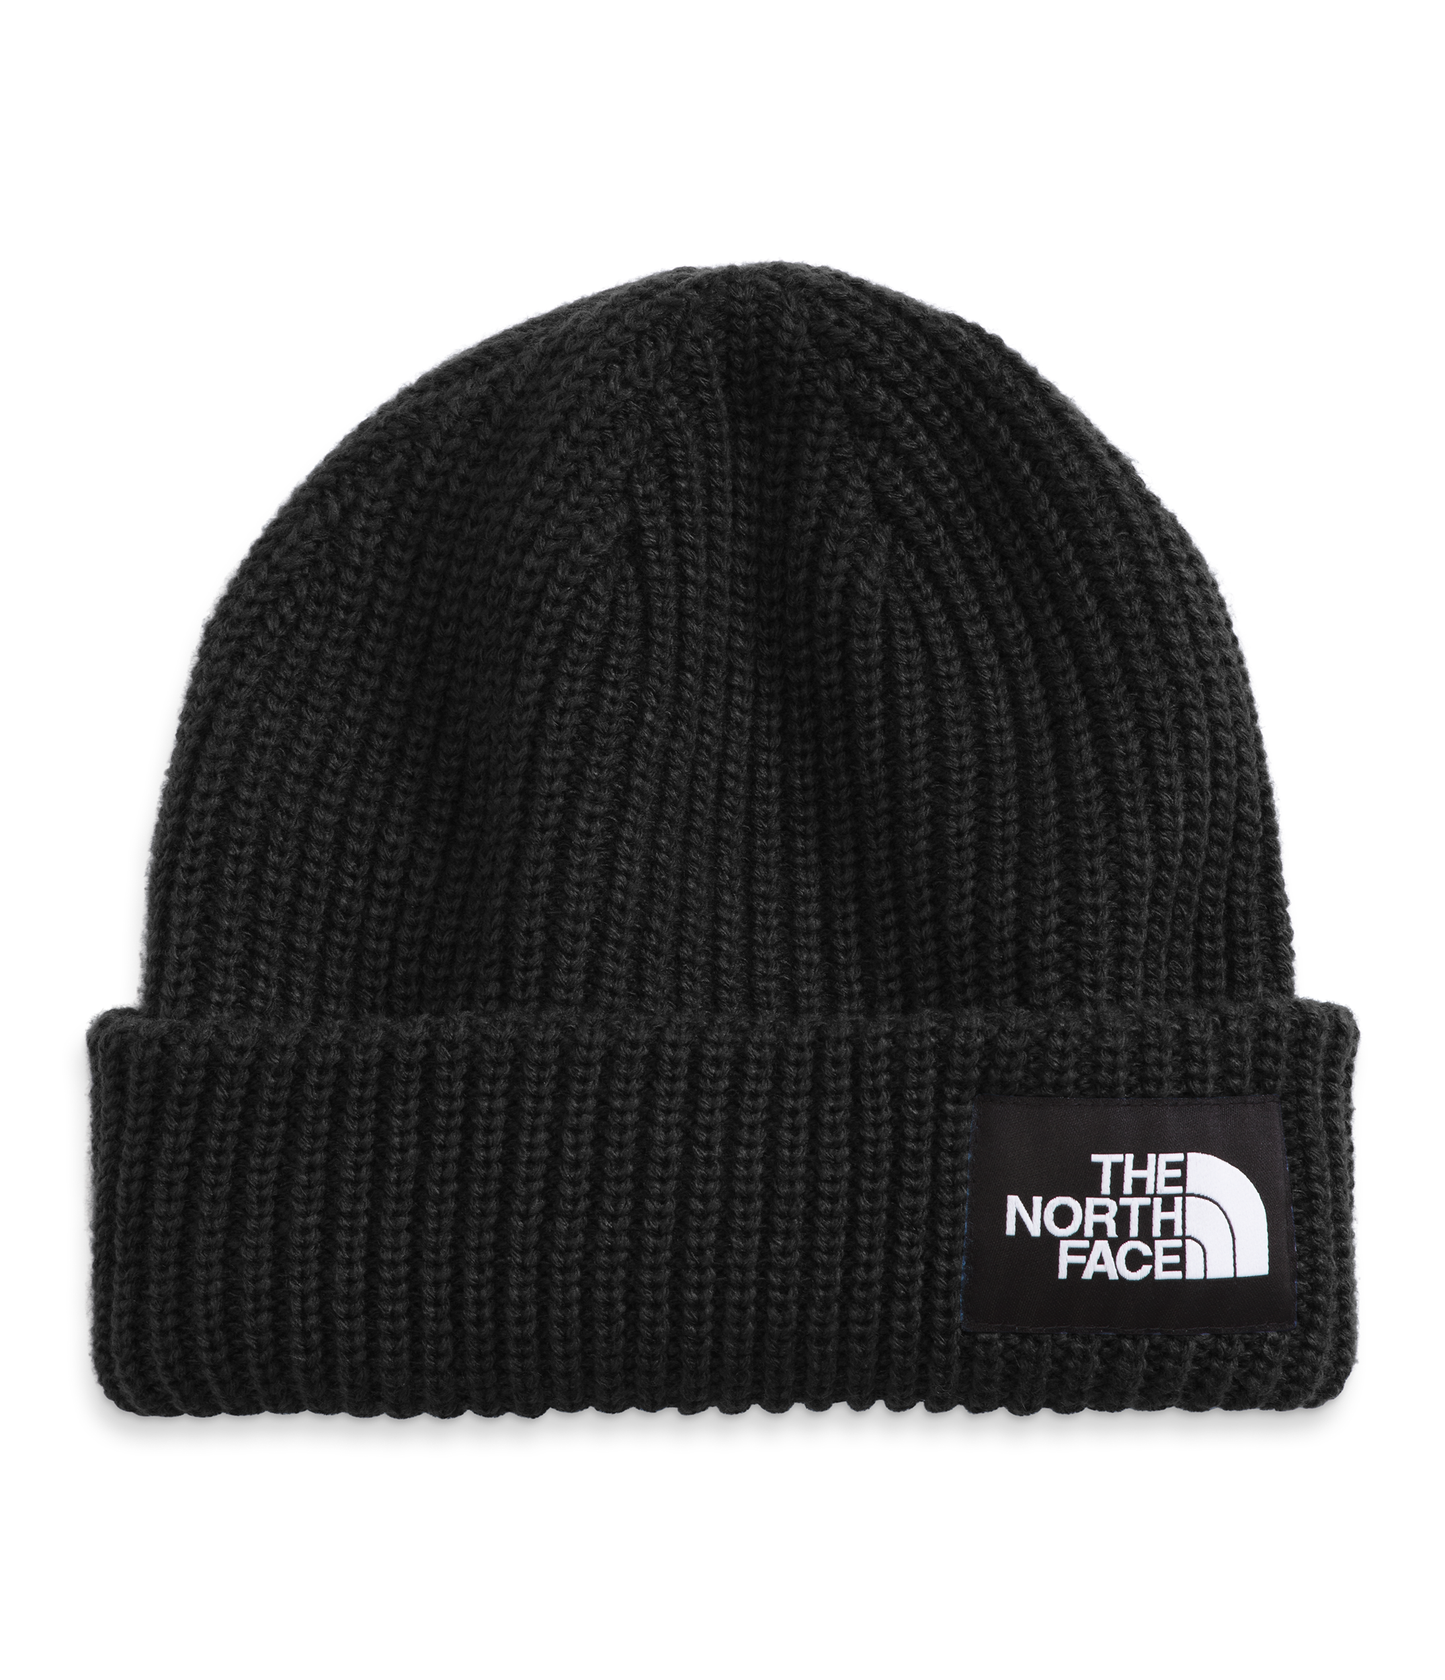 The North Face Salty Dog Beanie - Kids'